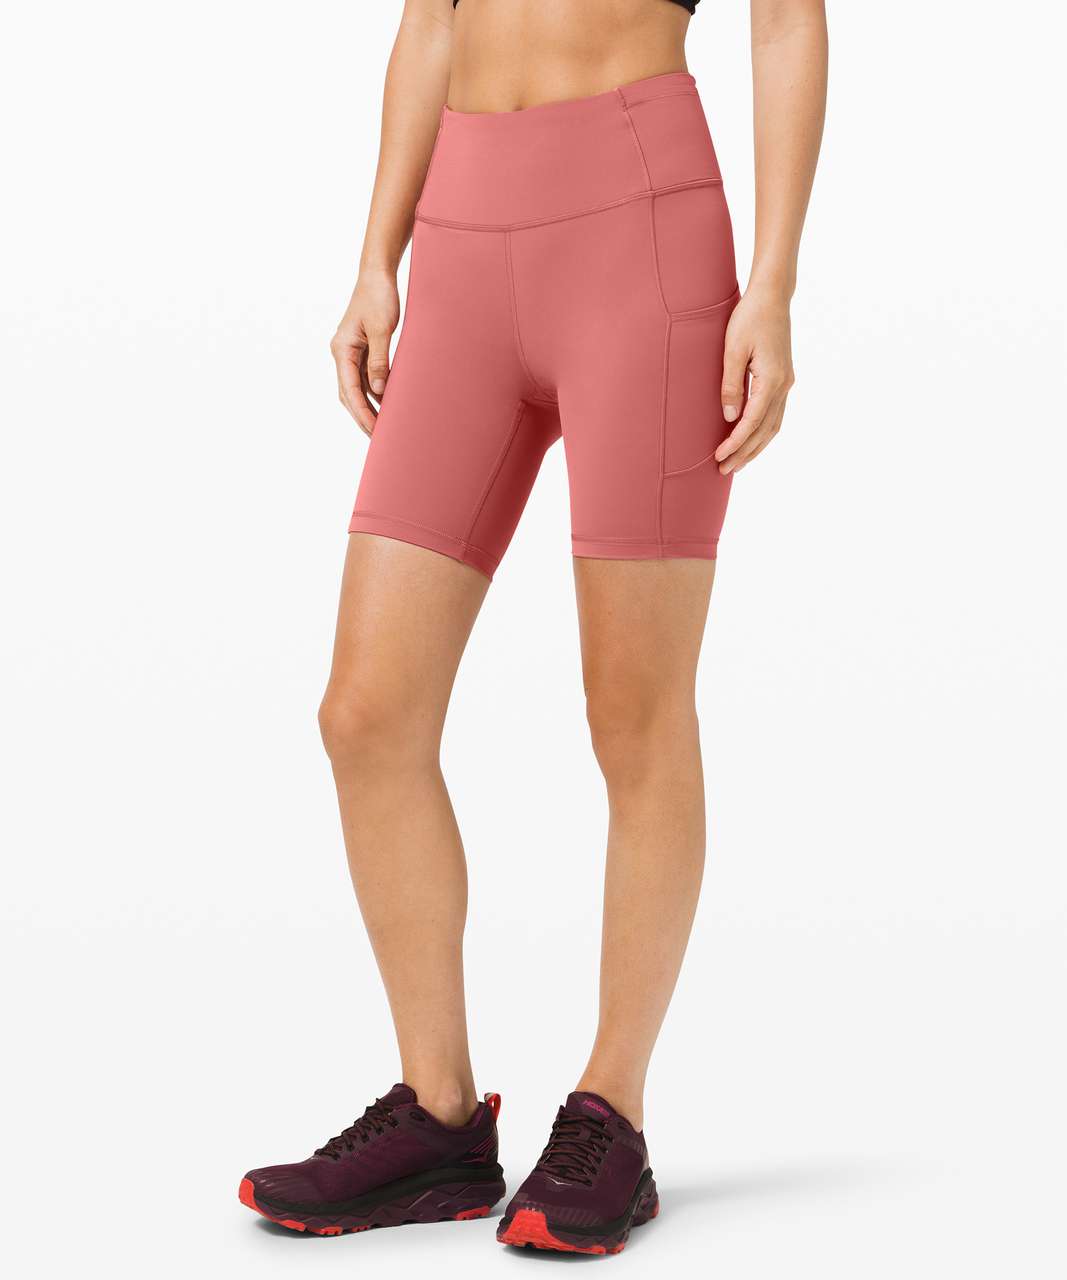 Lululemon Fast and Free Short 8" *Cool - Cherry Tint